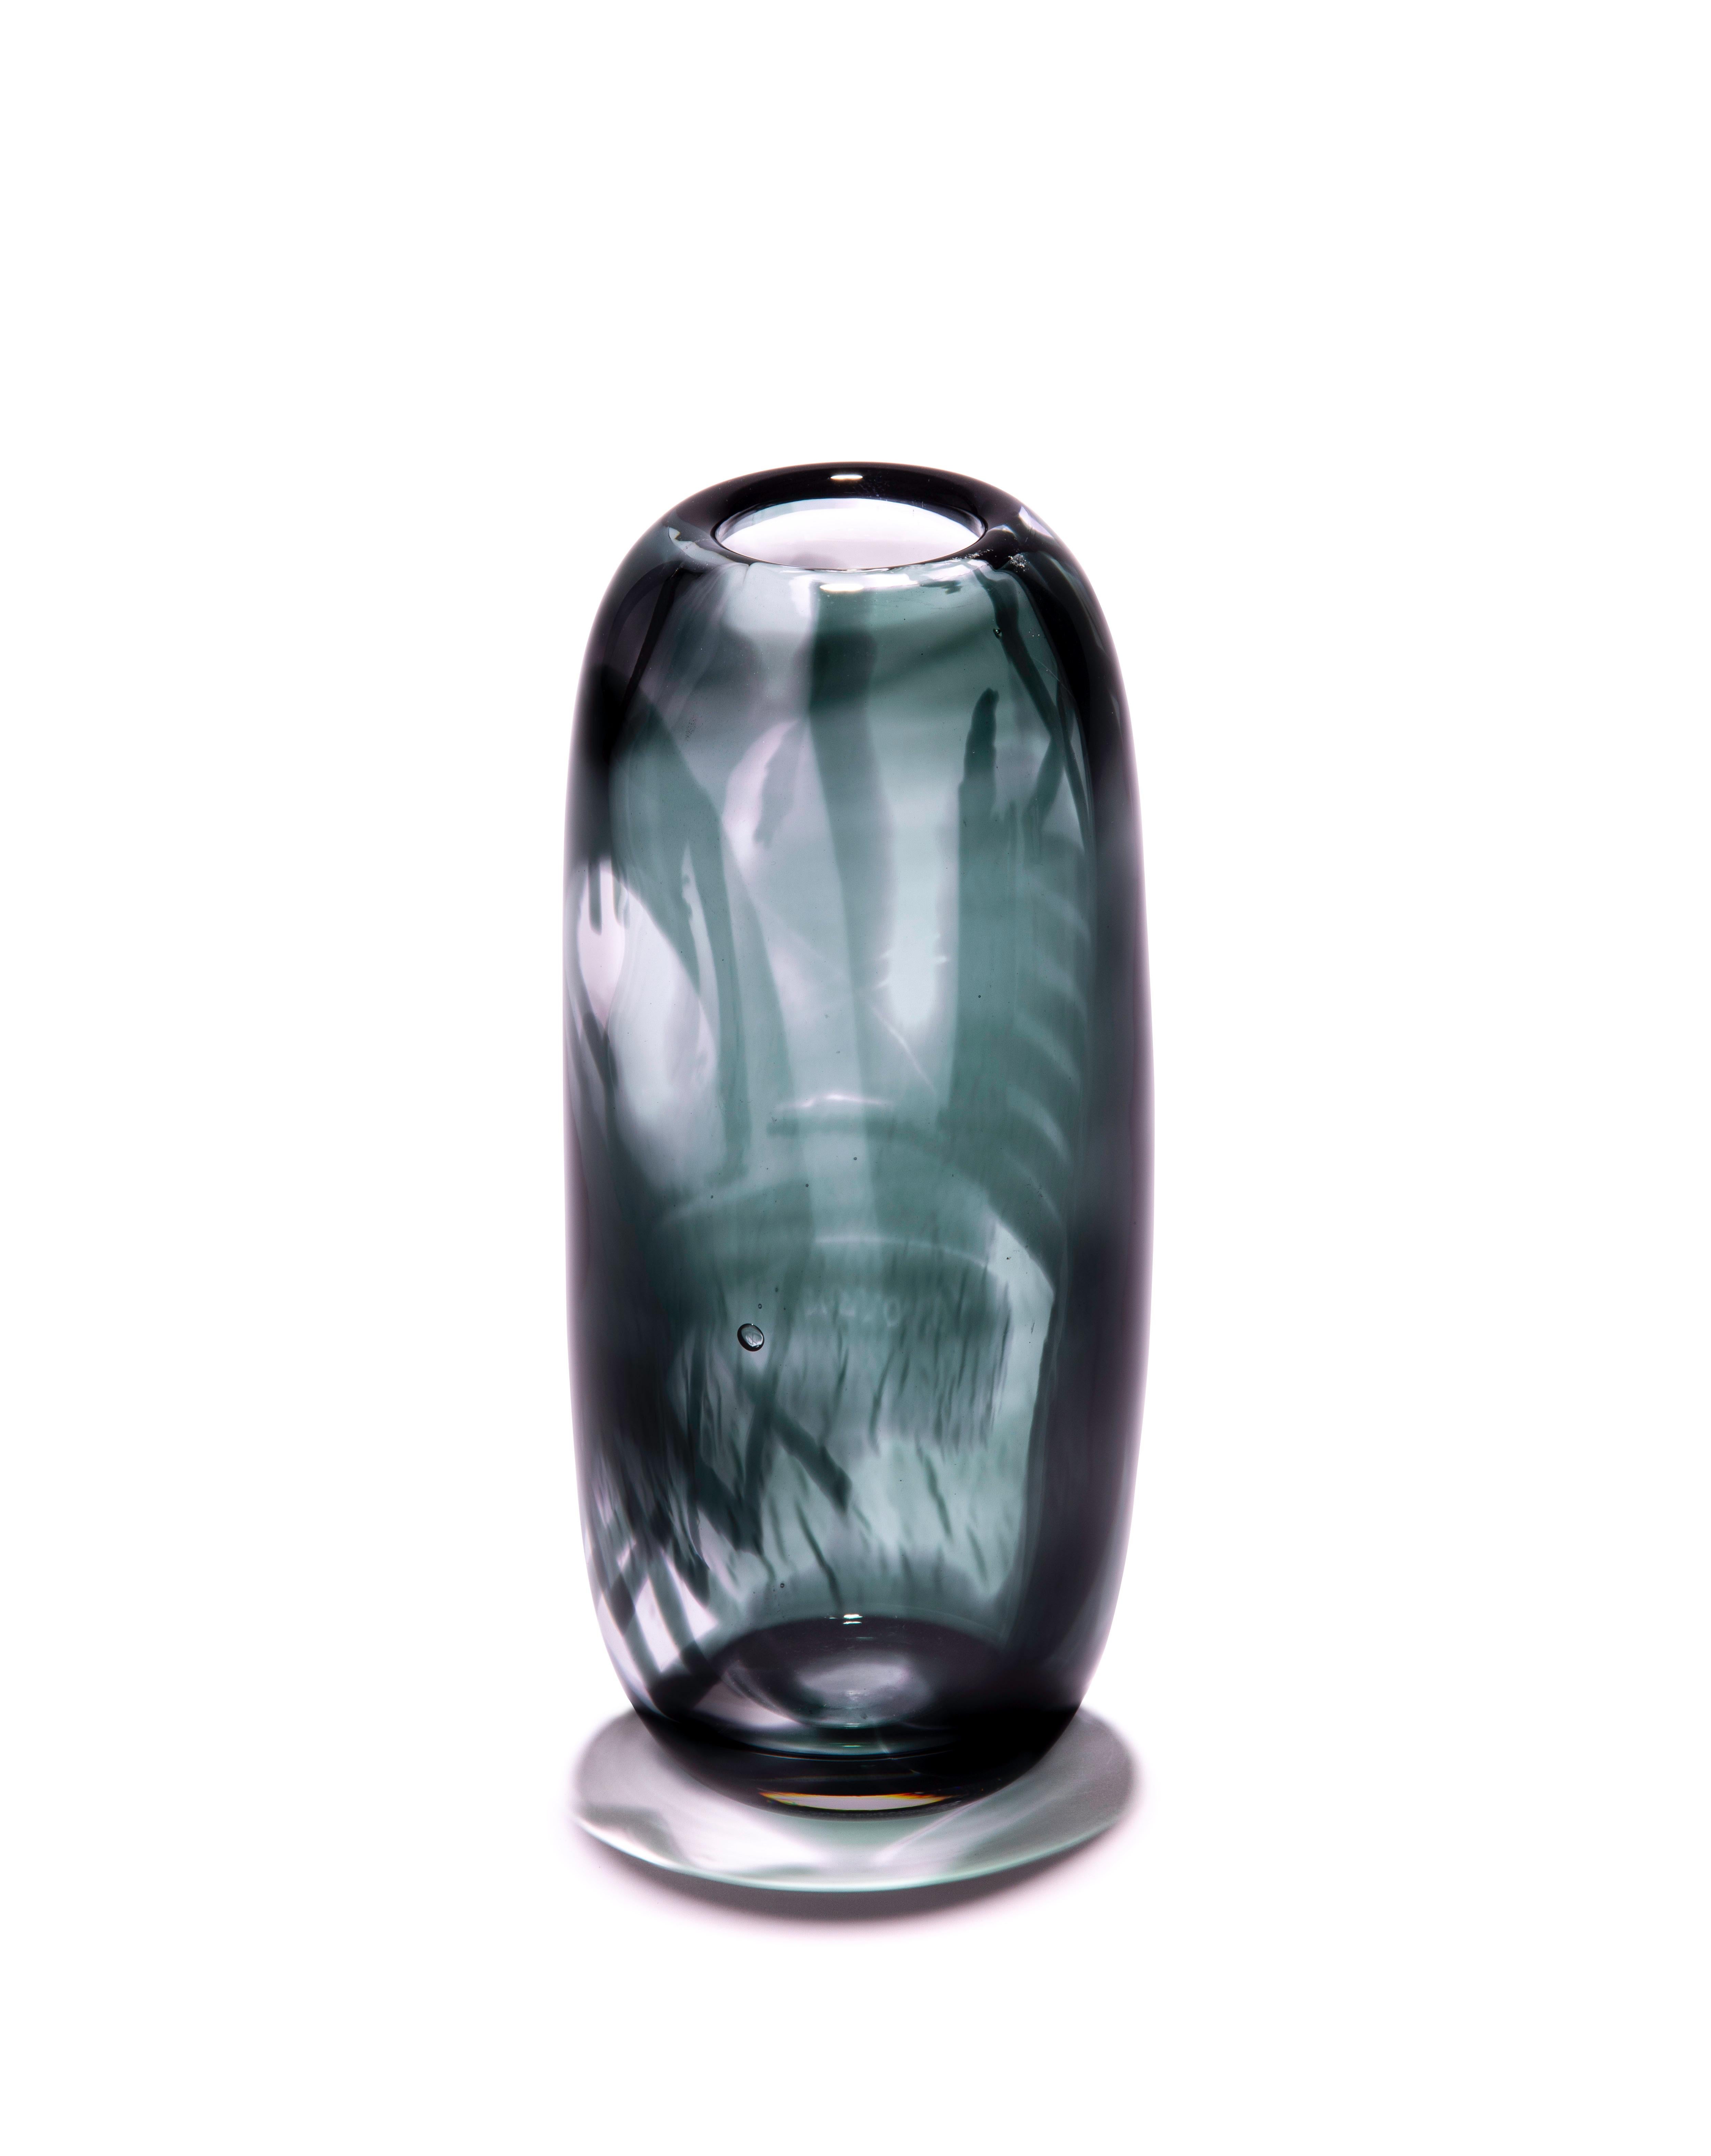 Contemporary Unique Harvest Graal Blue and Black Glass Vase by Tiina Sarapu